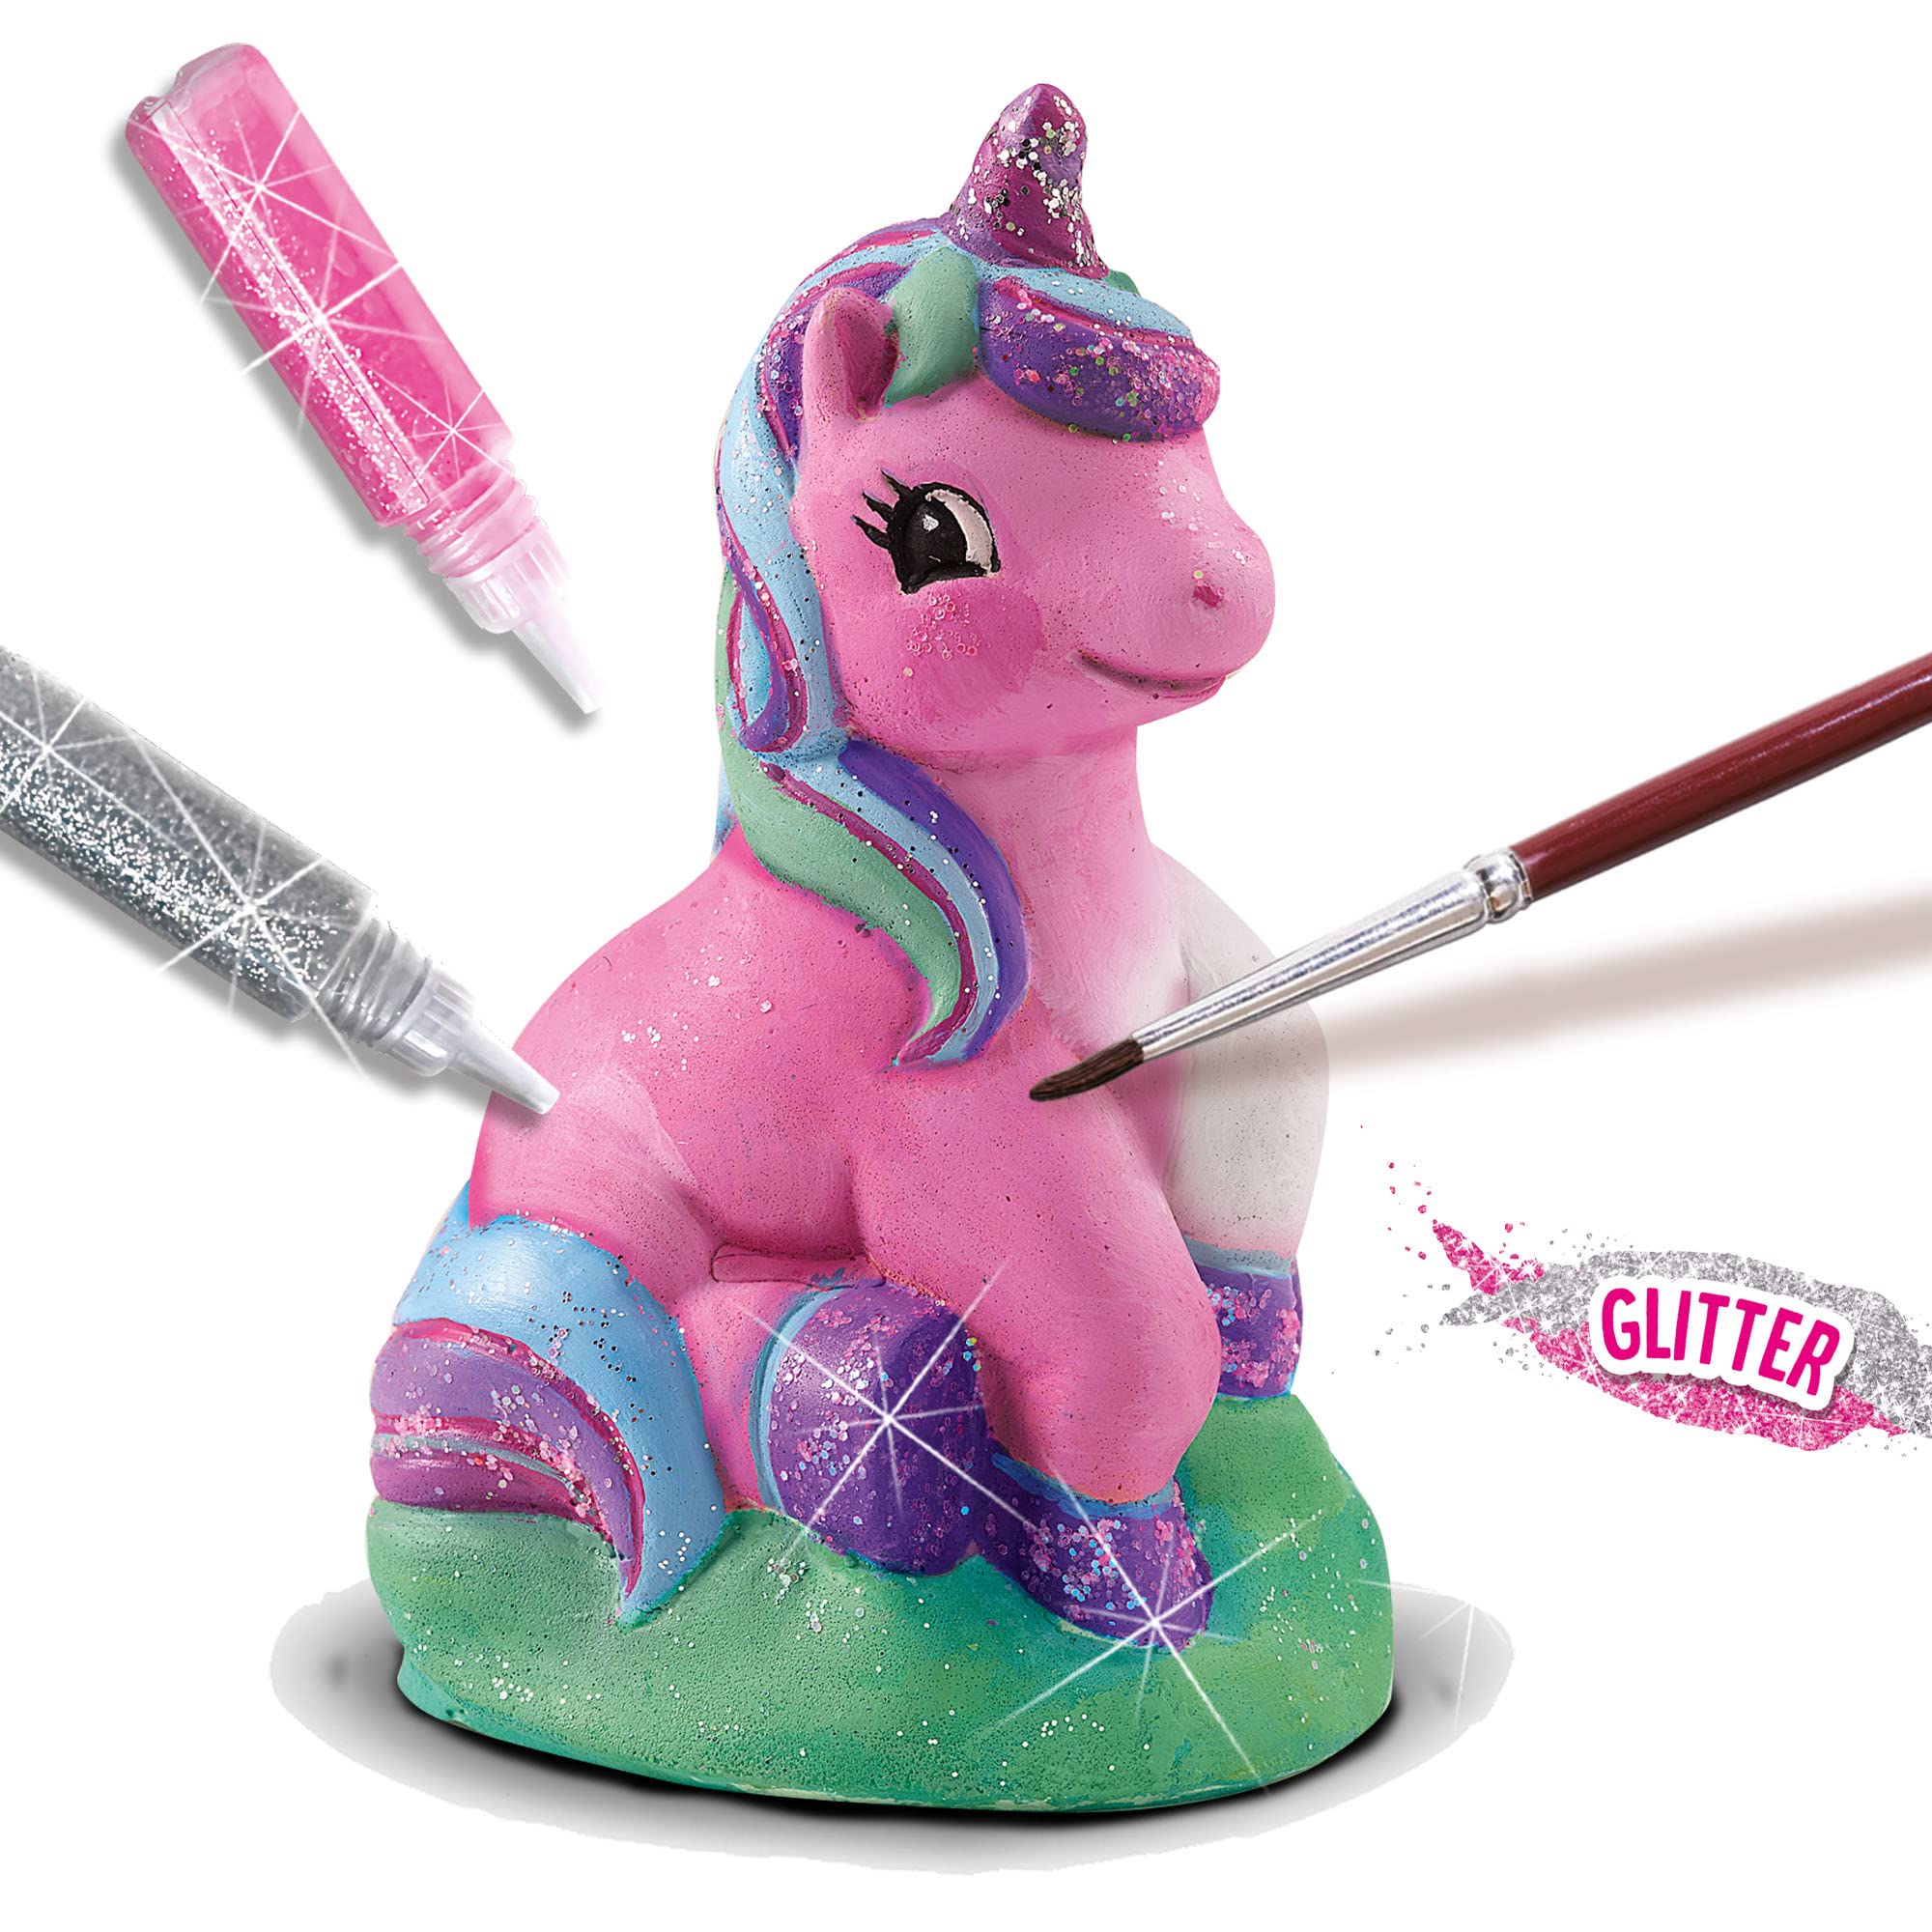 SES Creative 01299 Casting and Painting - Unicorn - Casting Plaster in 3D; Quick-Drying Plaster; The Detailed Mould yields Excellent Results; Encourages Creativity; Age 5+